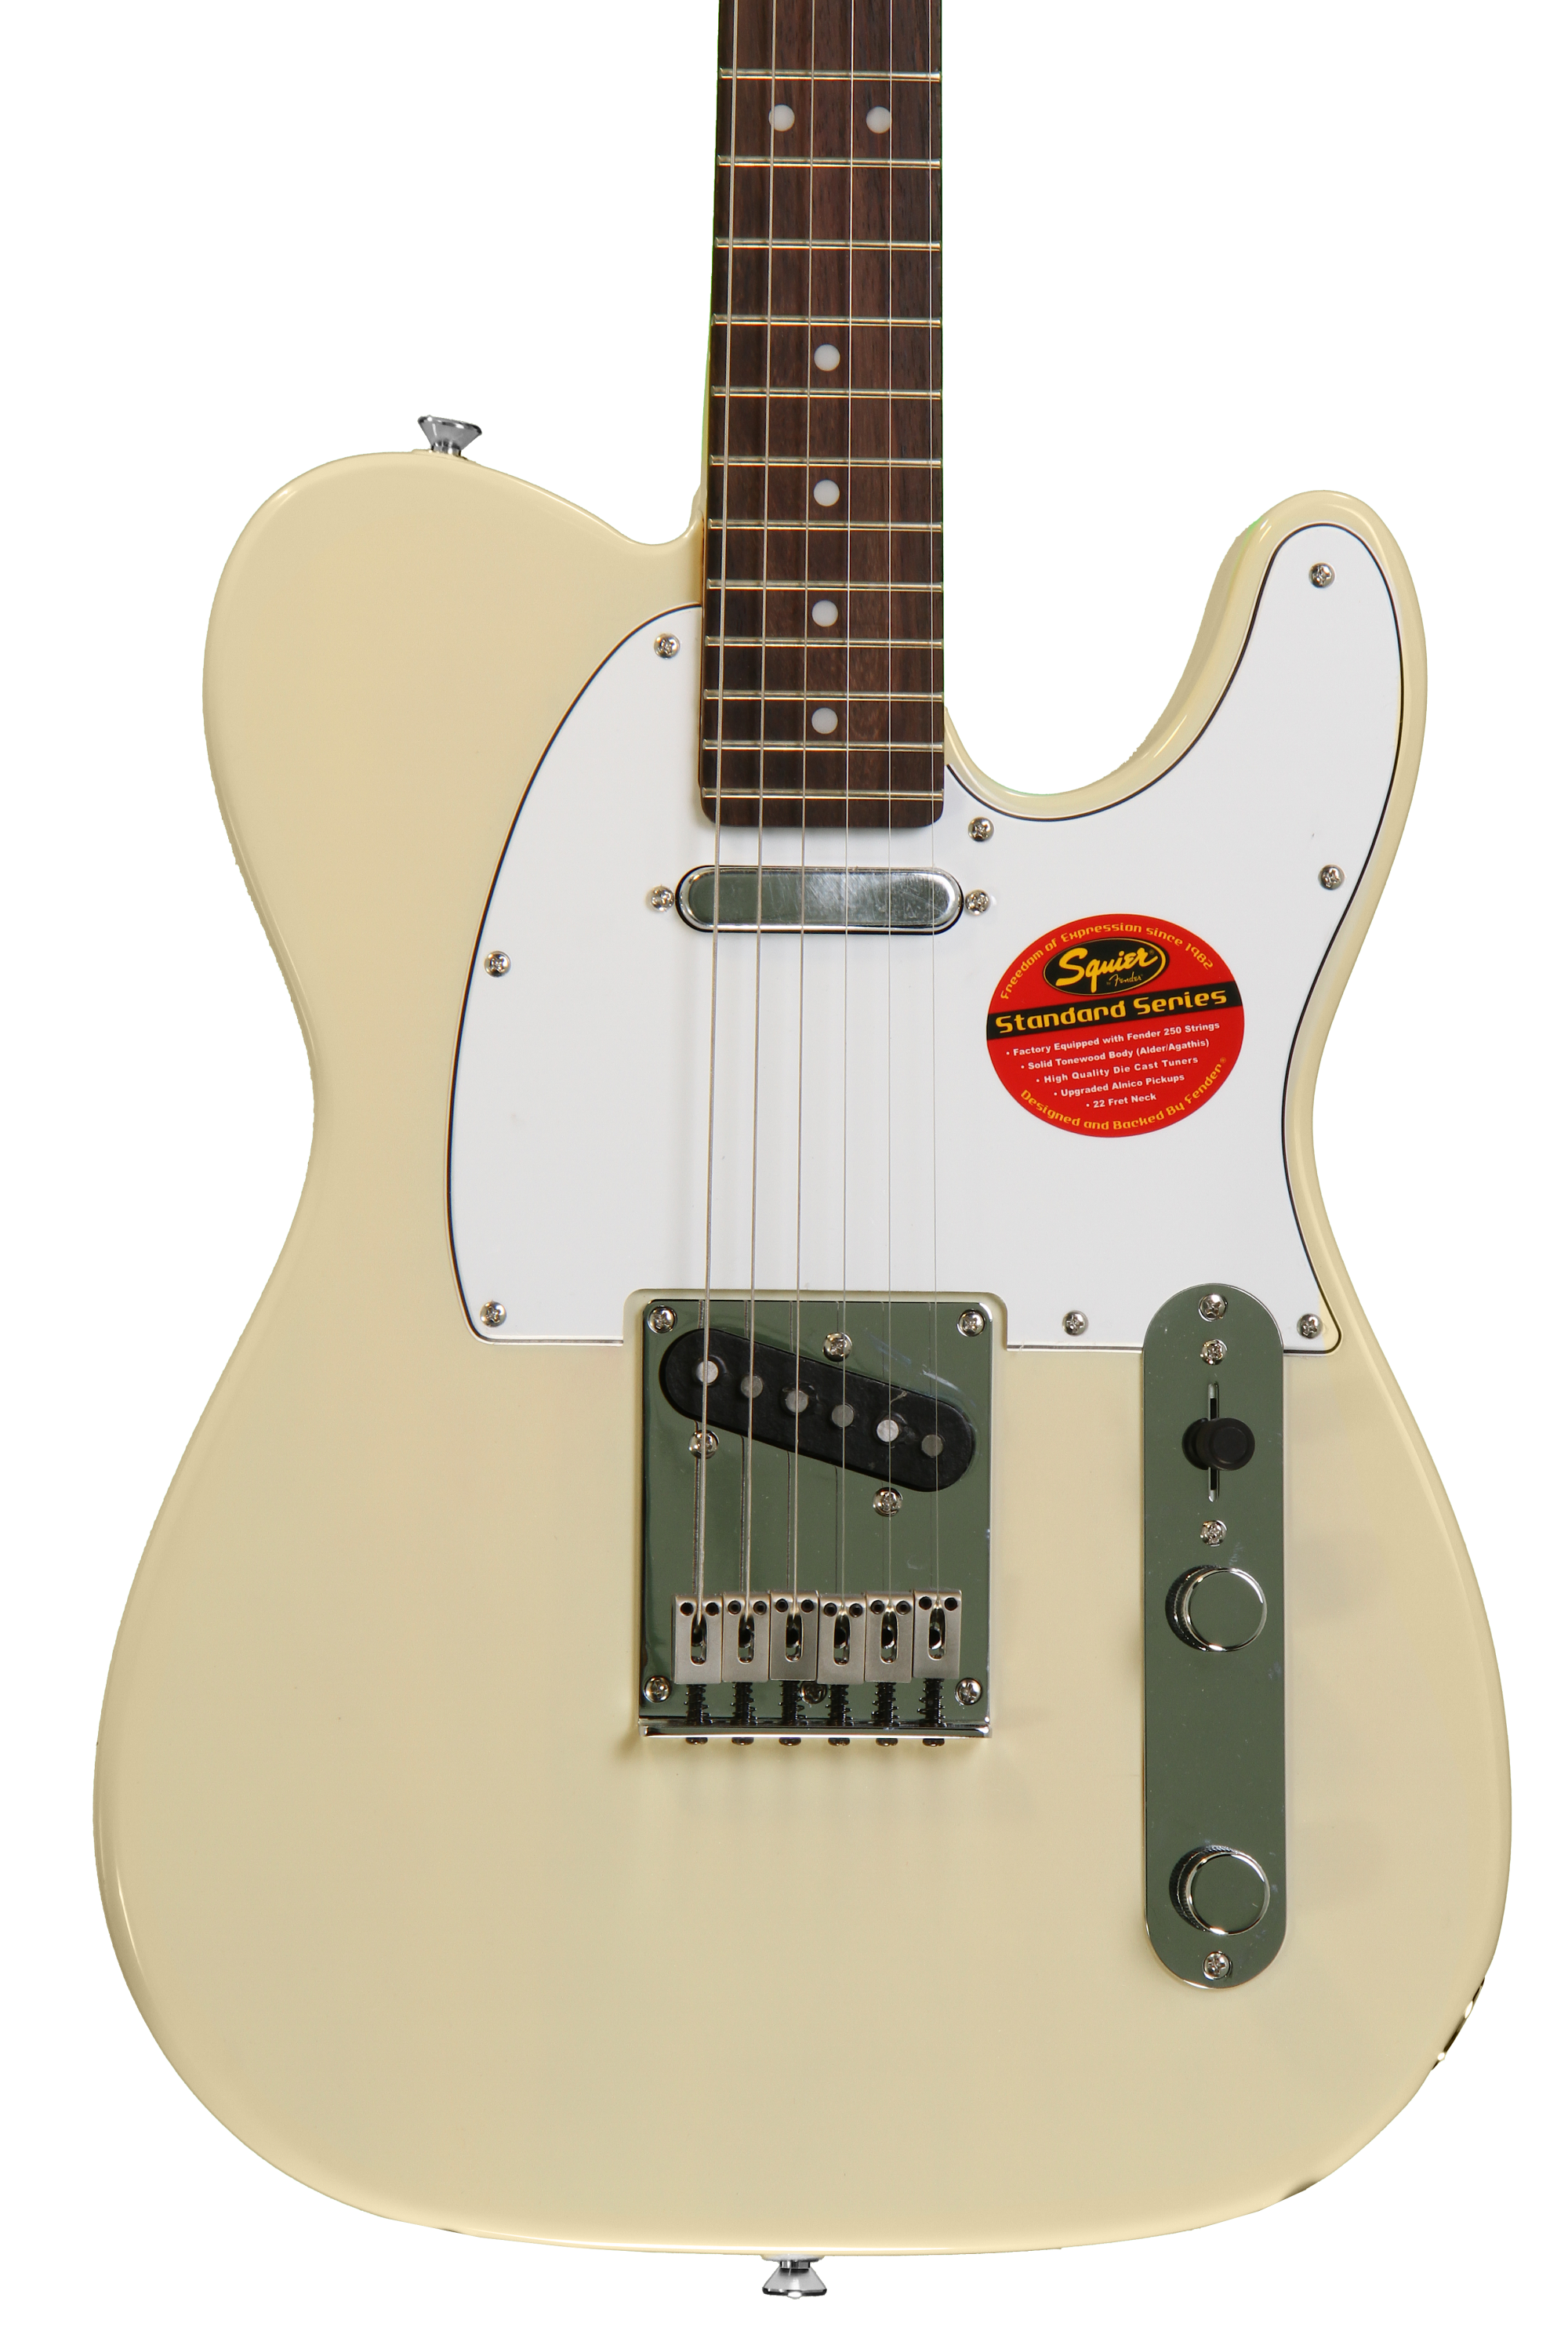 Squire スクワイヤー Standard Telecaster ATB - 器材